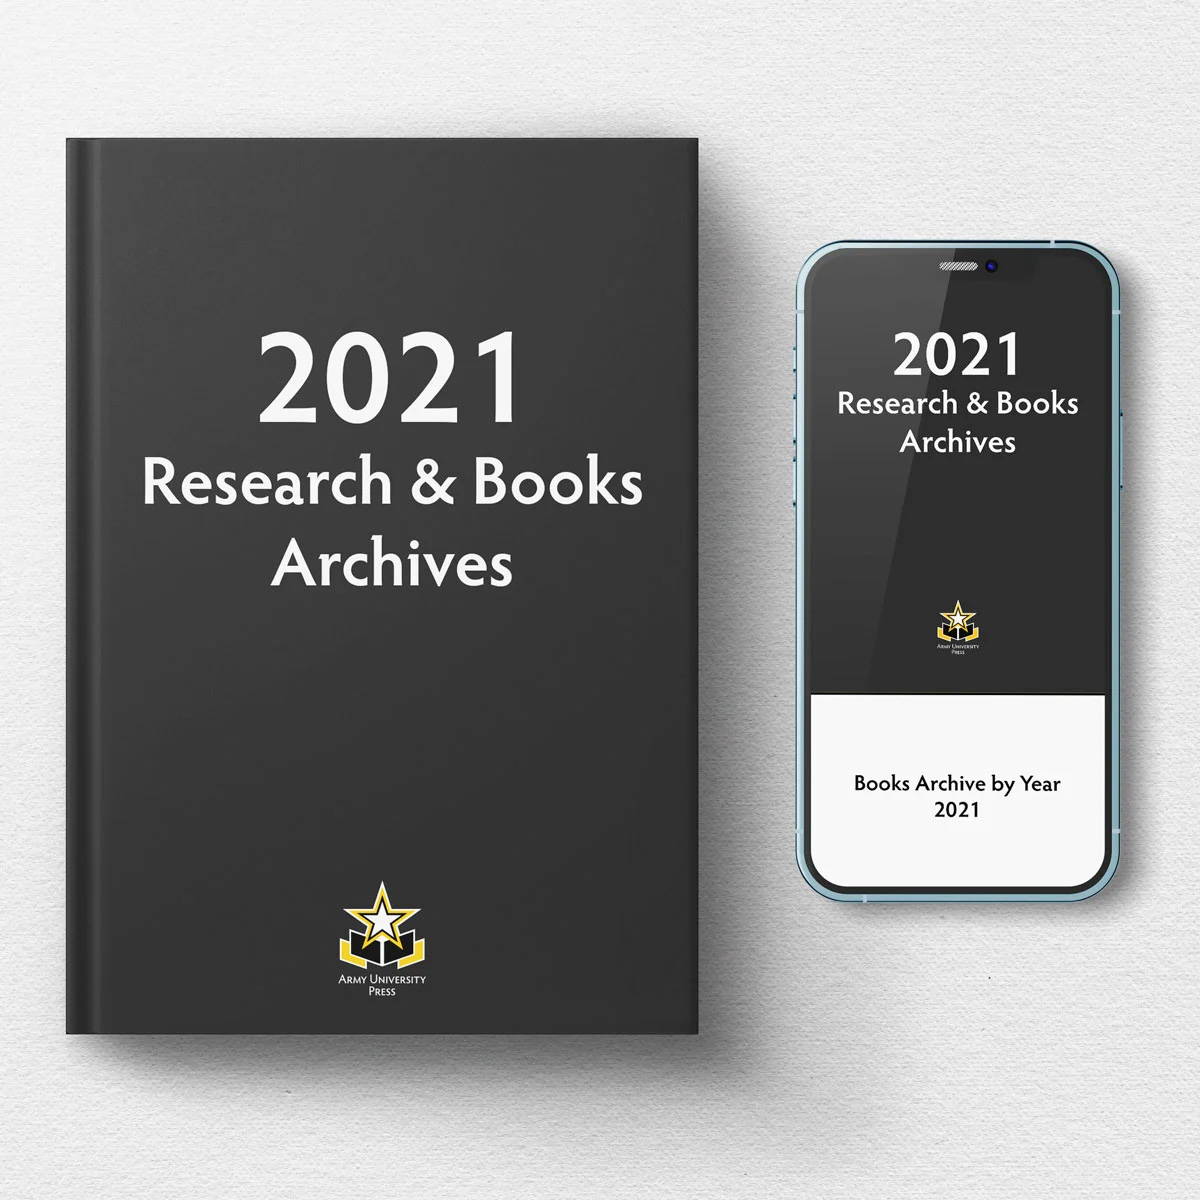 2021 Archives